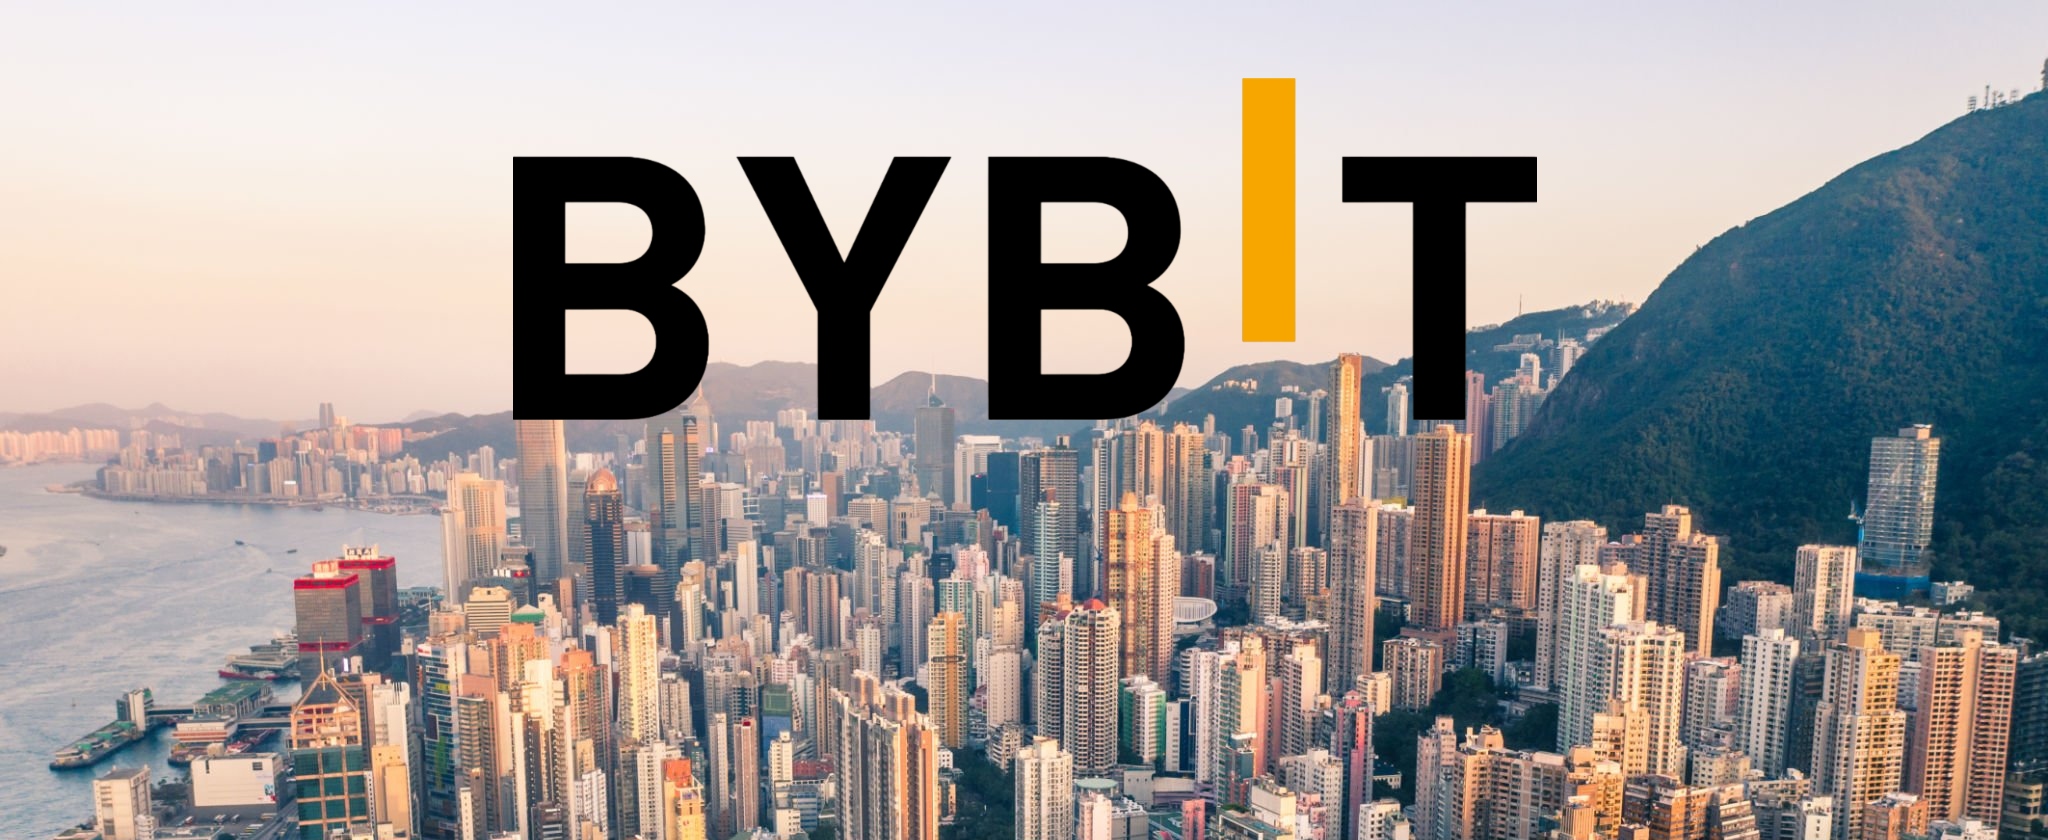 Cryptocurrency exchange Bybit has been placed on Hong Kong's investor warning list by the SFC, which says the platform is operating unlicensed in the city.